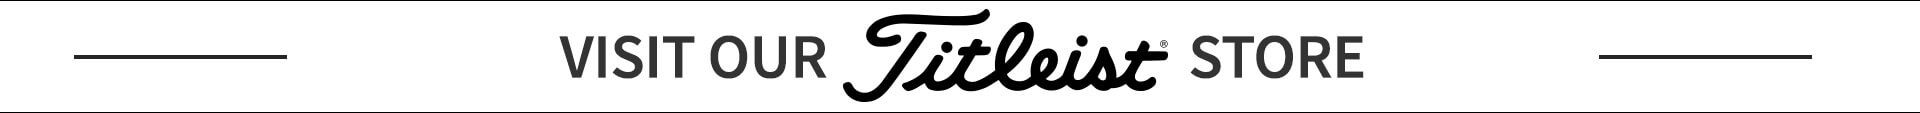 Visit the Titleist Store